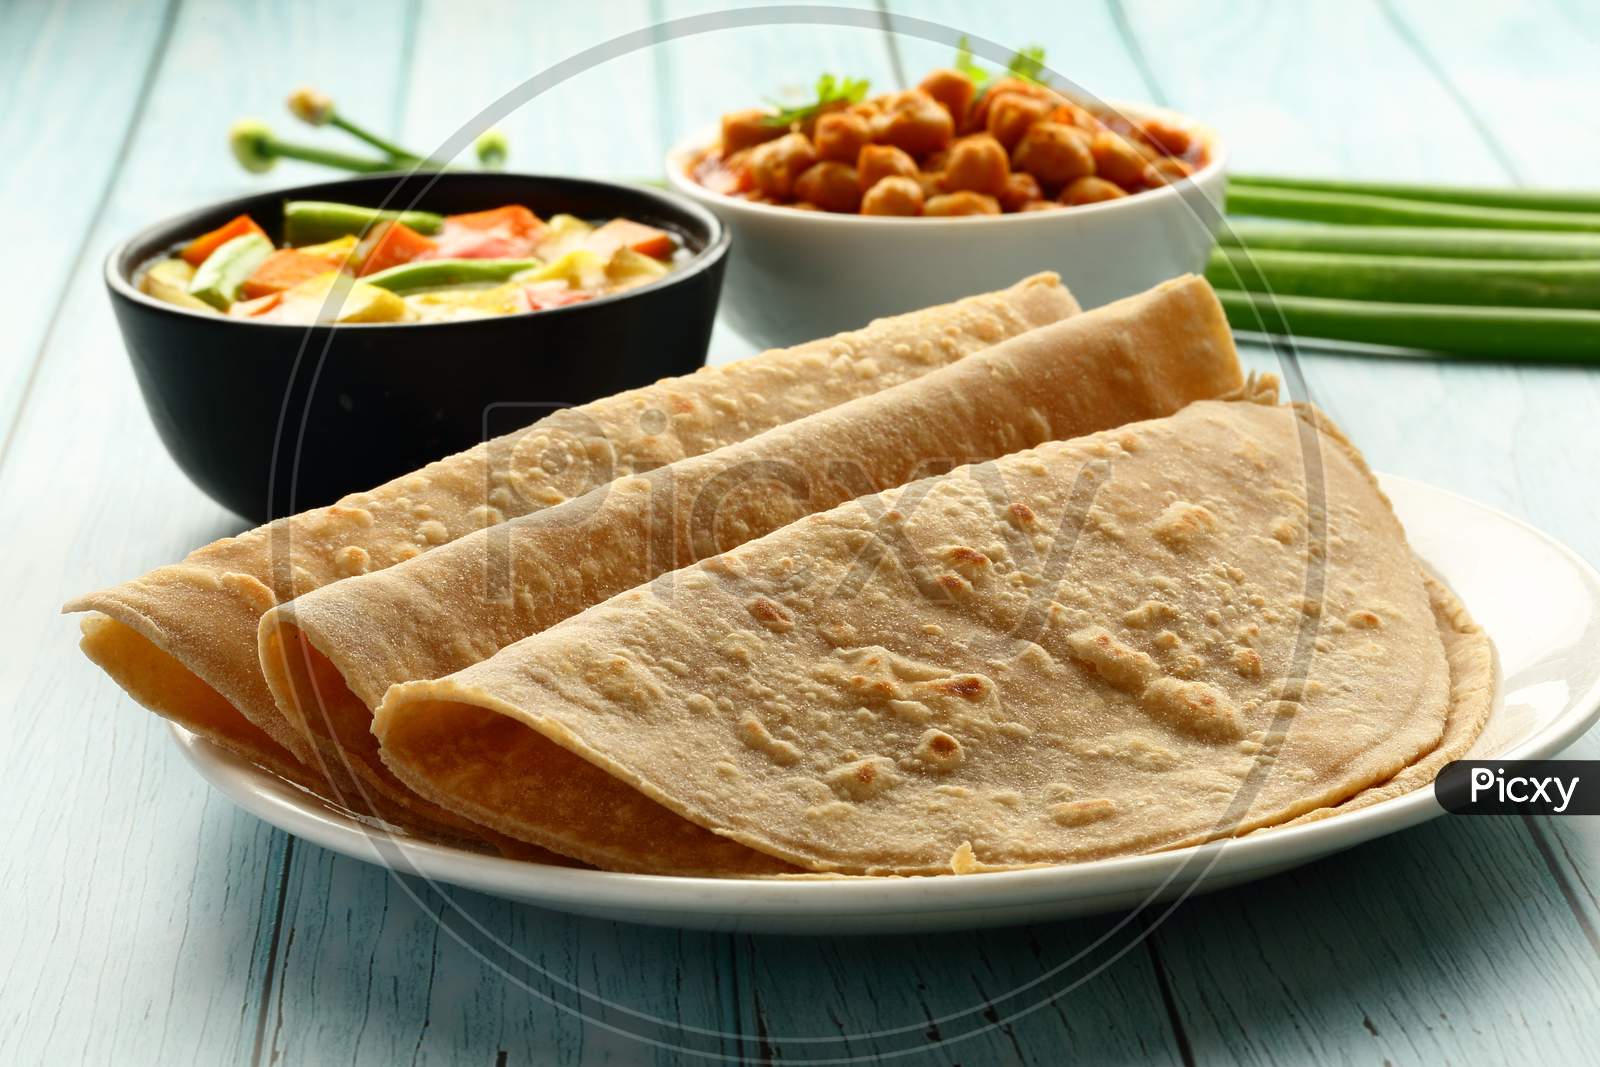 Delicious chapatti served with curries.